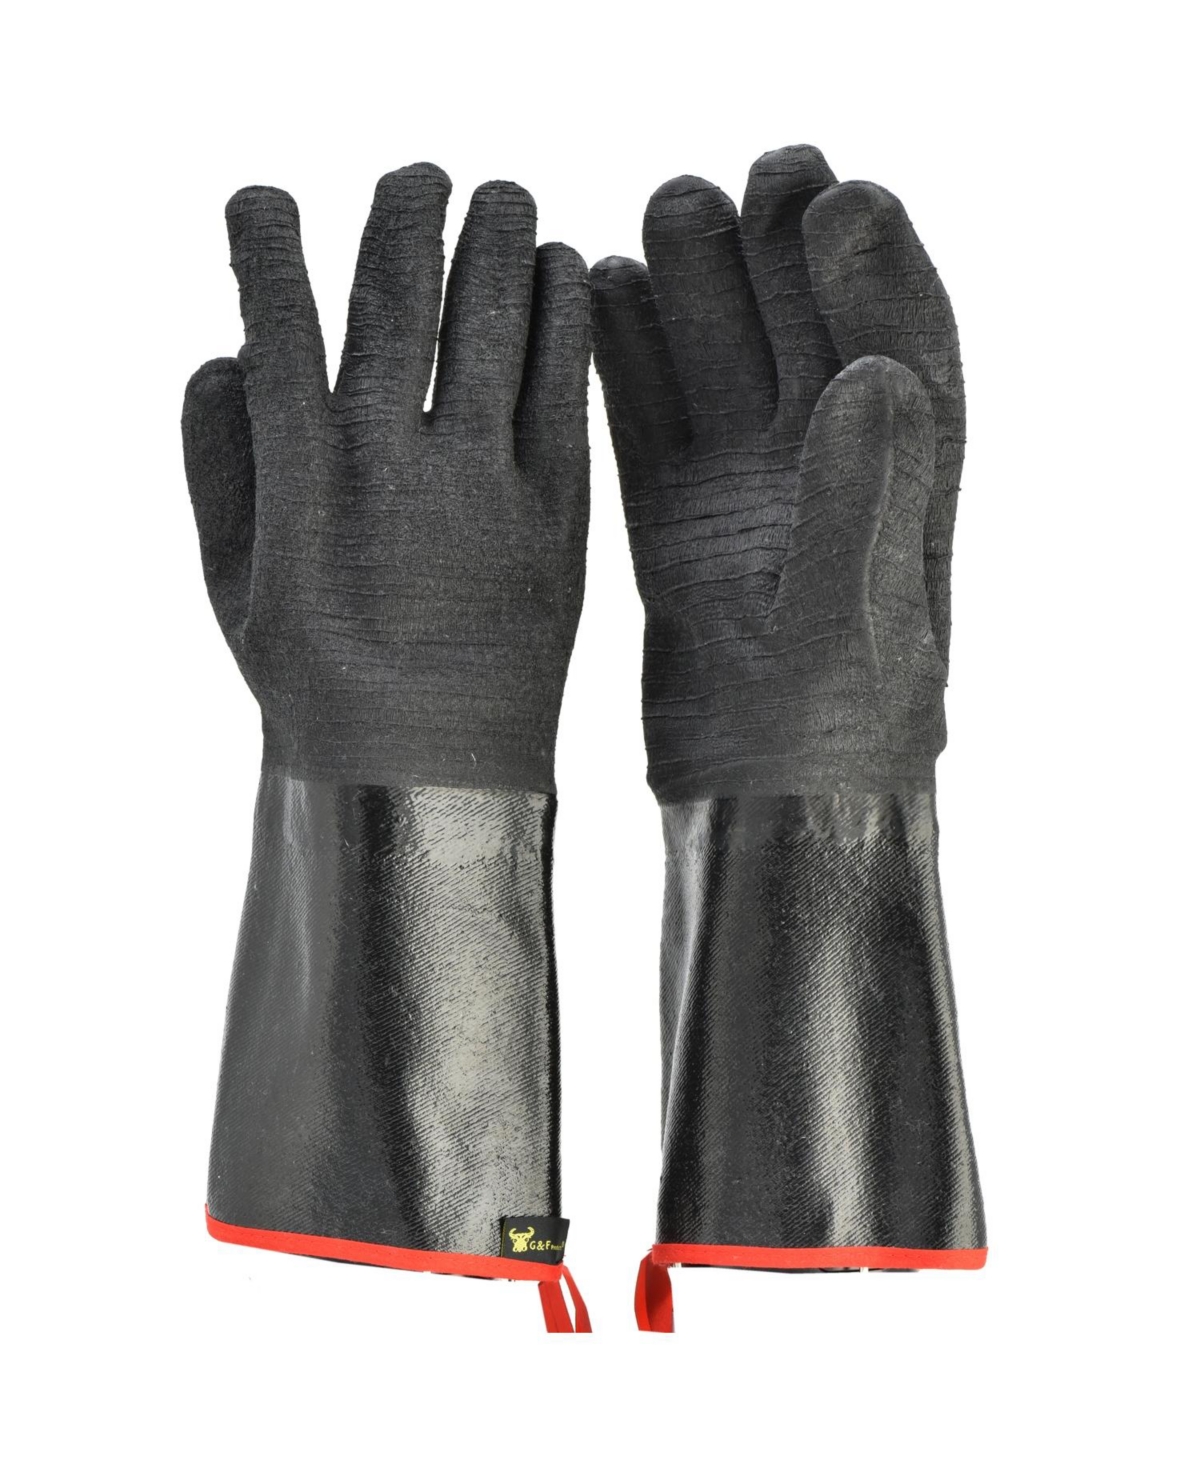 Insulated Waterproof Bbq, Smoker, Grill Cooking Gloves - Black